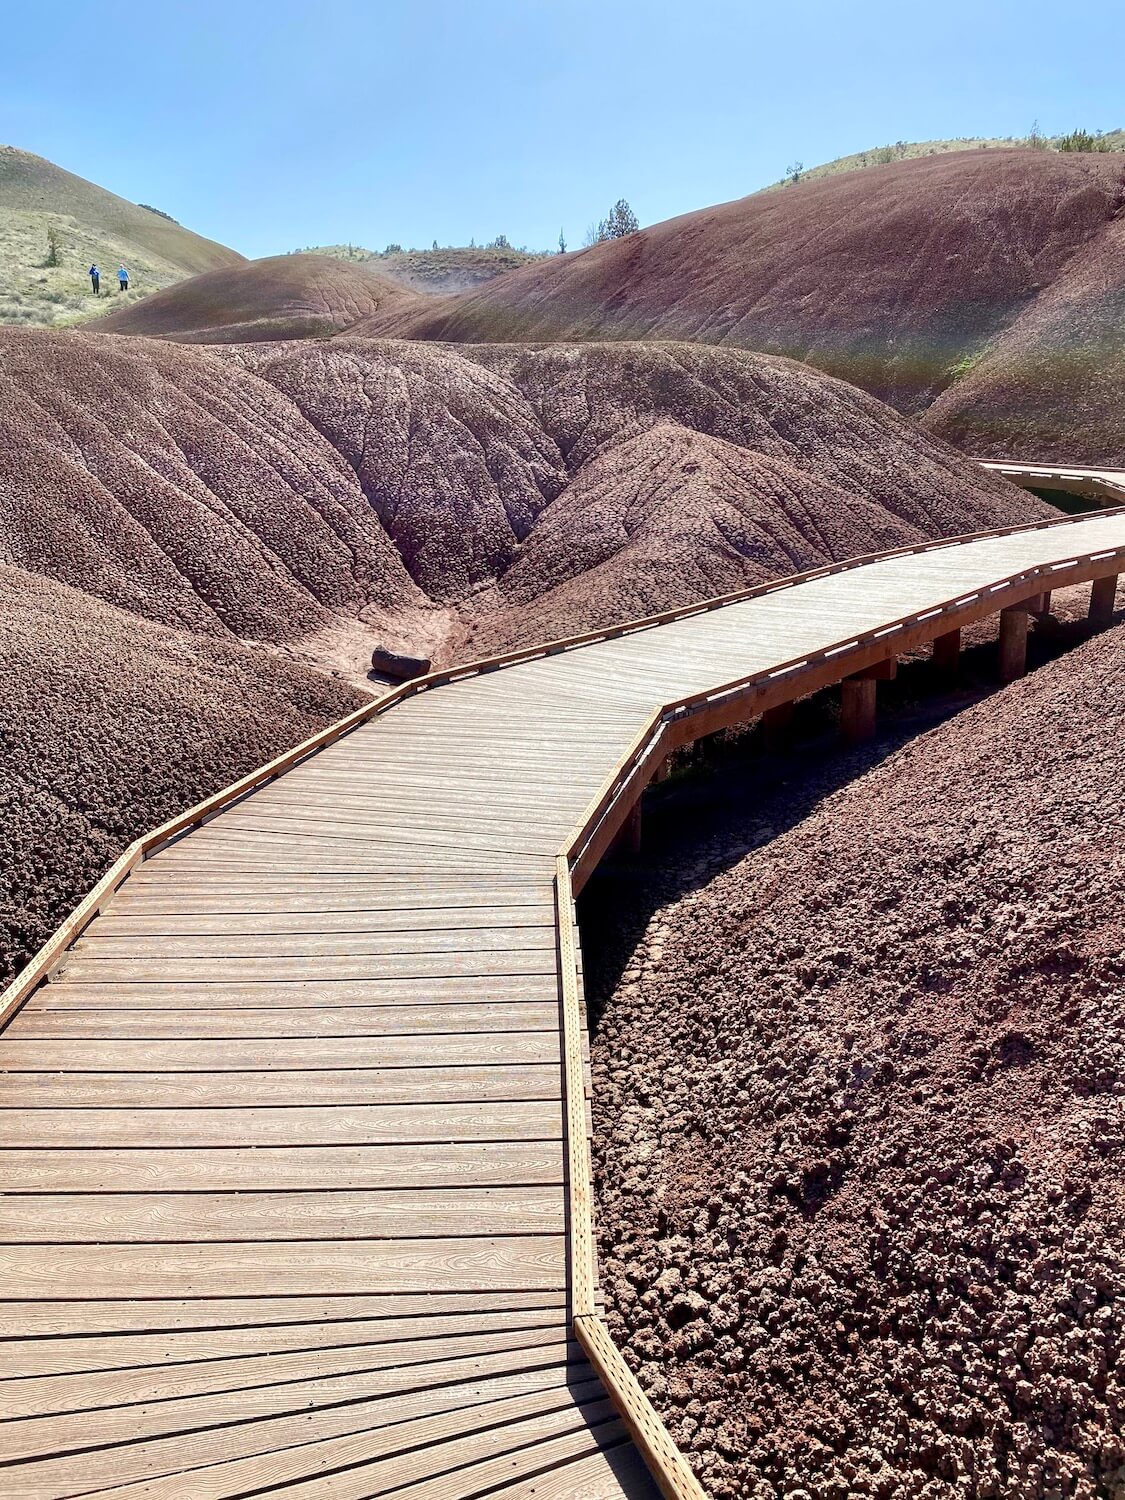 The boardwalk at the Painted Hills National Monument is a popular place for visitors because the access is so easy.  The boardwalk winds through coral like mounds of red soil while two hikers wearing blue walk toward an even larger yellow-green hill.  The sky above is bright blue and the reflection of the sun on the scene makes a light rainbow.  